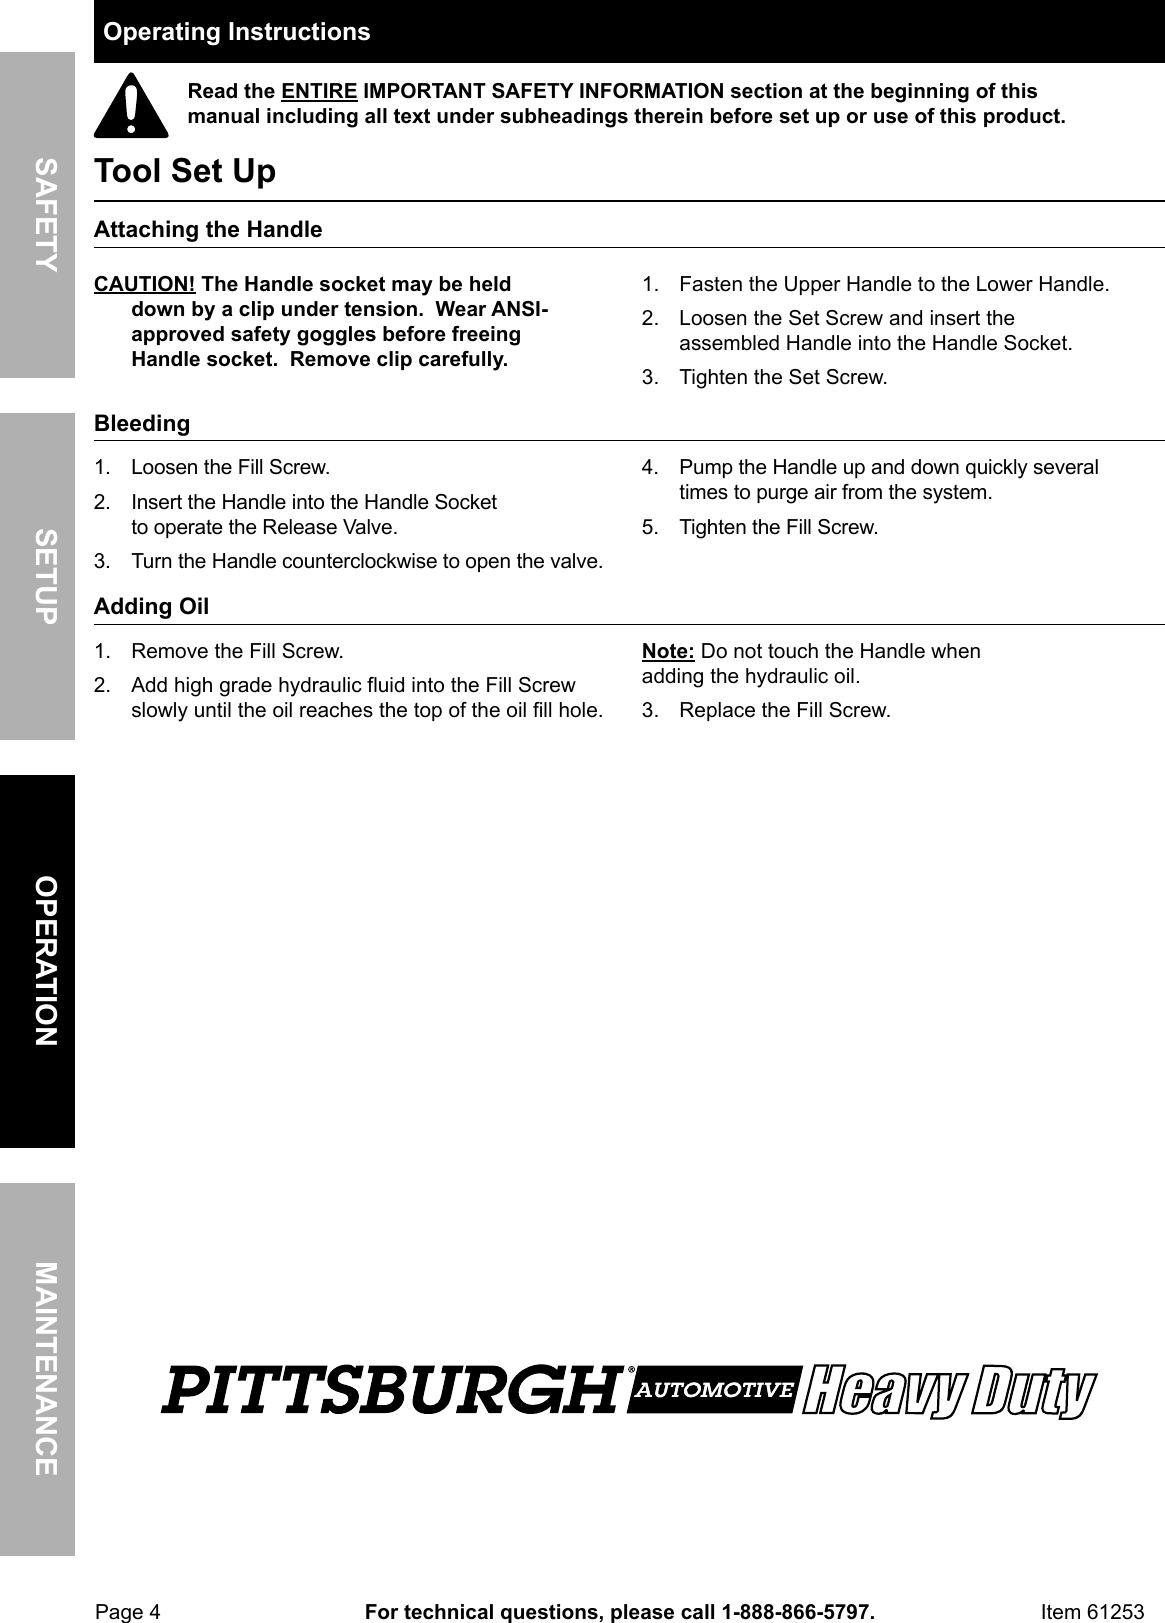 Page 4 of 8 - Manual For The 61253 3 Ton Low Profile Steel Heavy Duty Floor Jack With Rapid Pump®